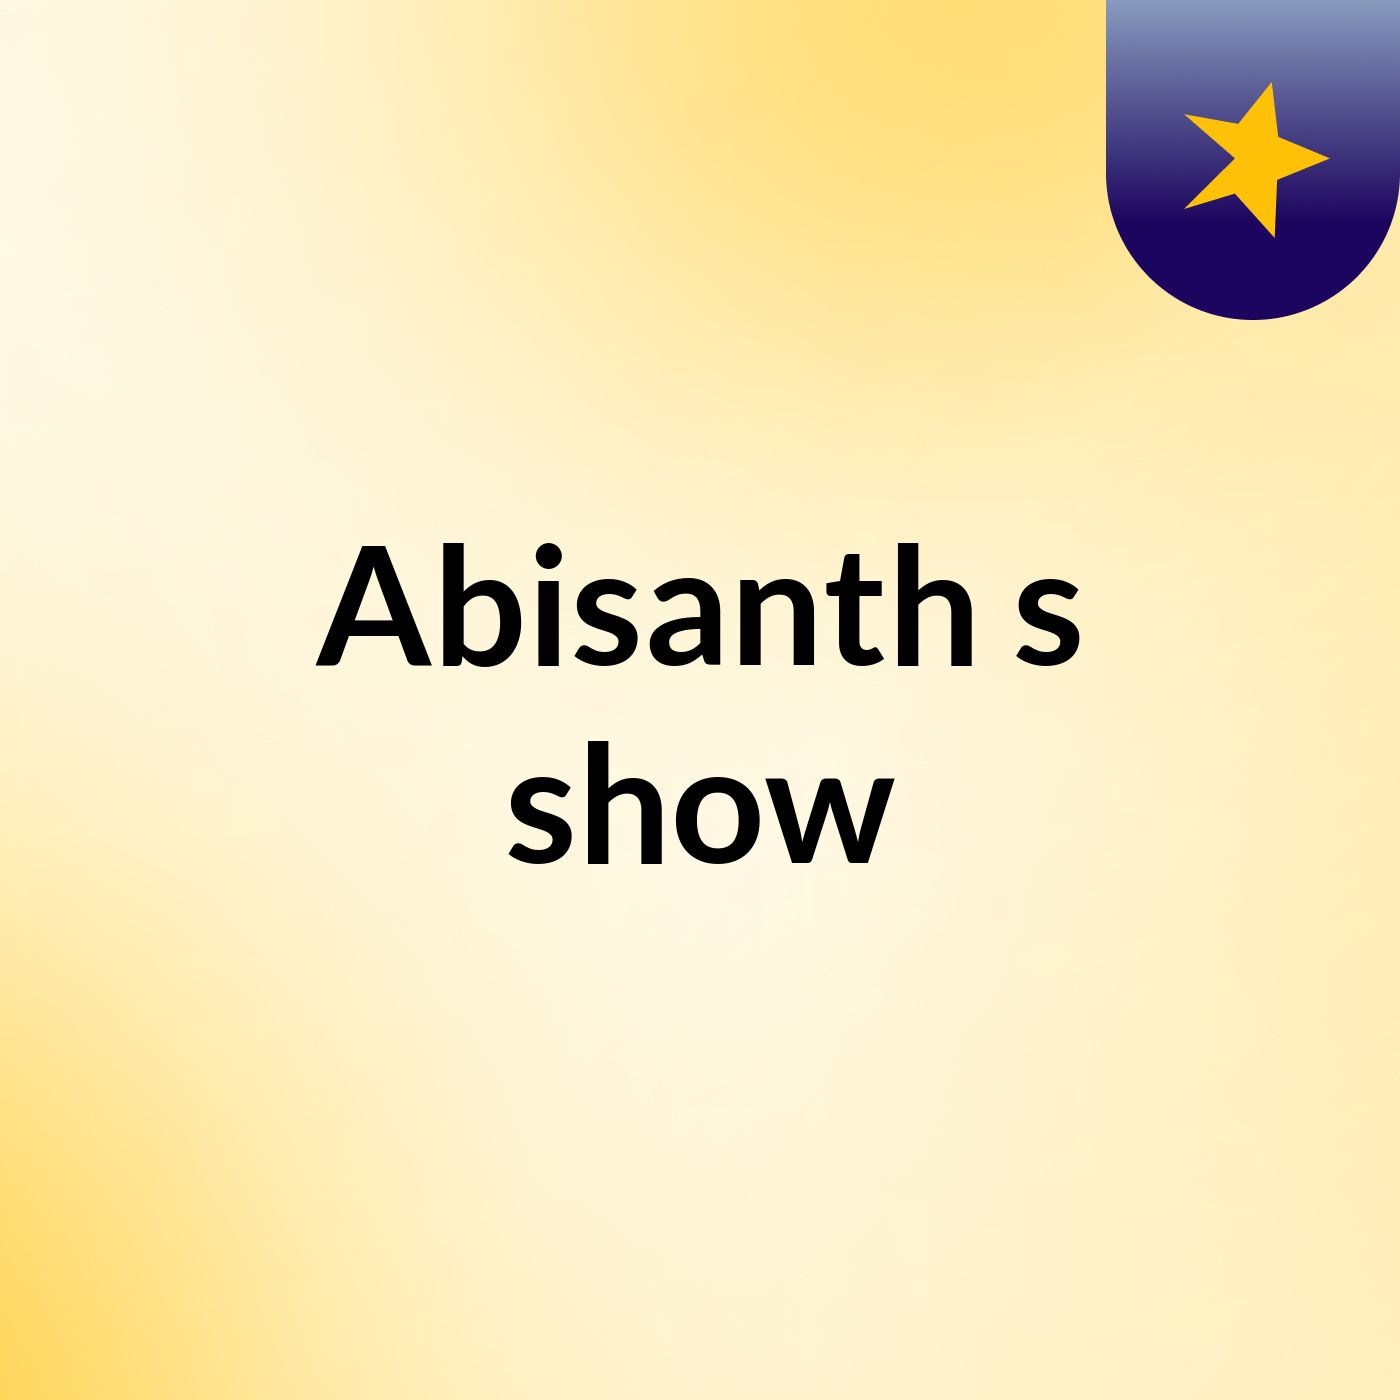 Abisanth's show